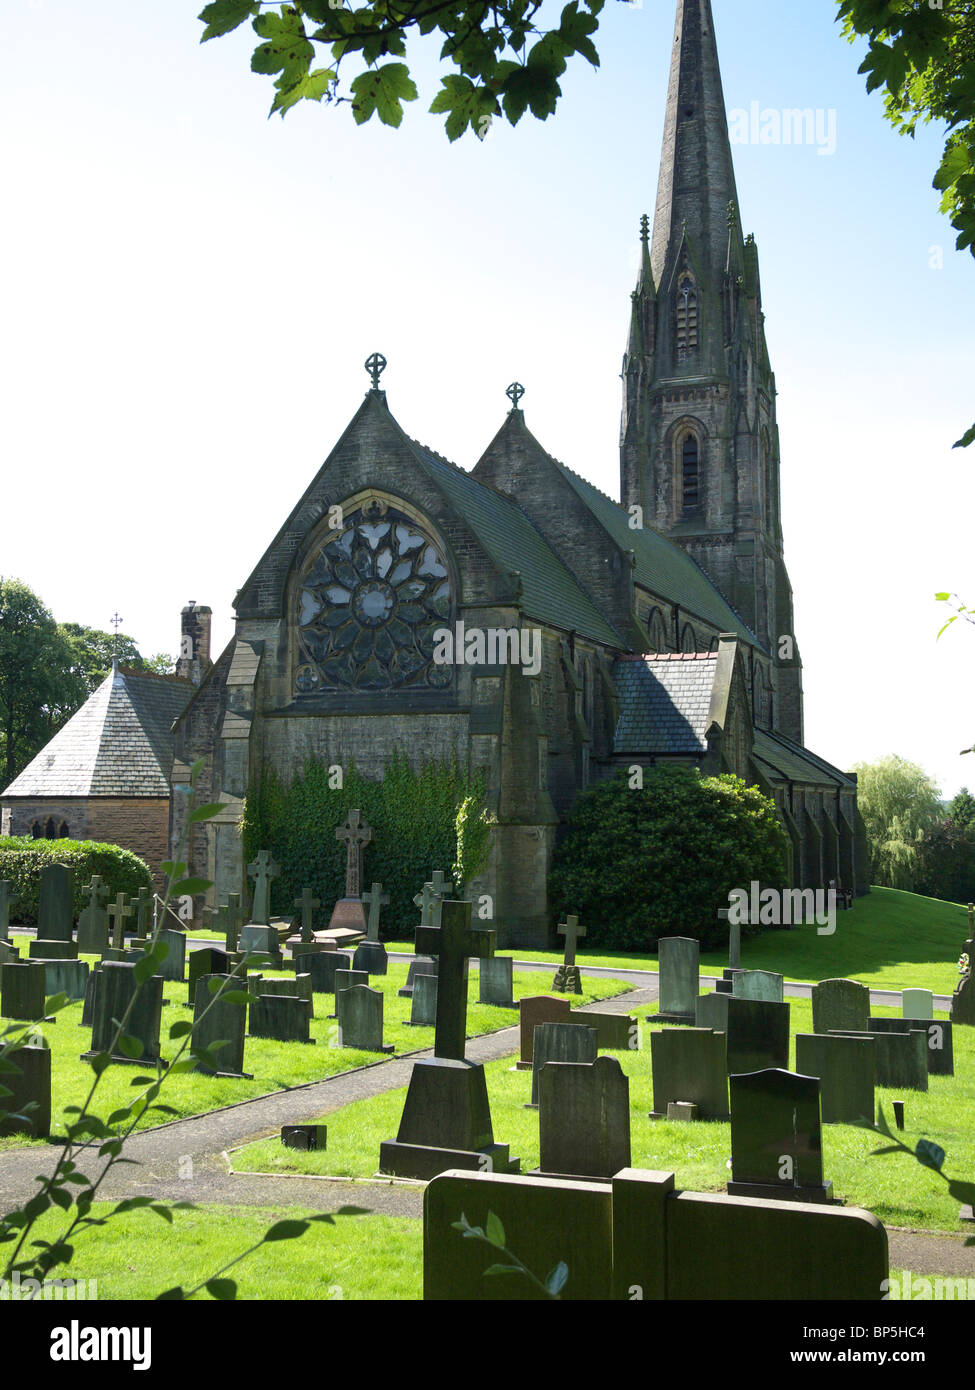 Our Lady and All Saints RC Church at Parbold, Lancashire, England, UK. Stock Photo